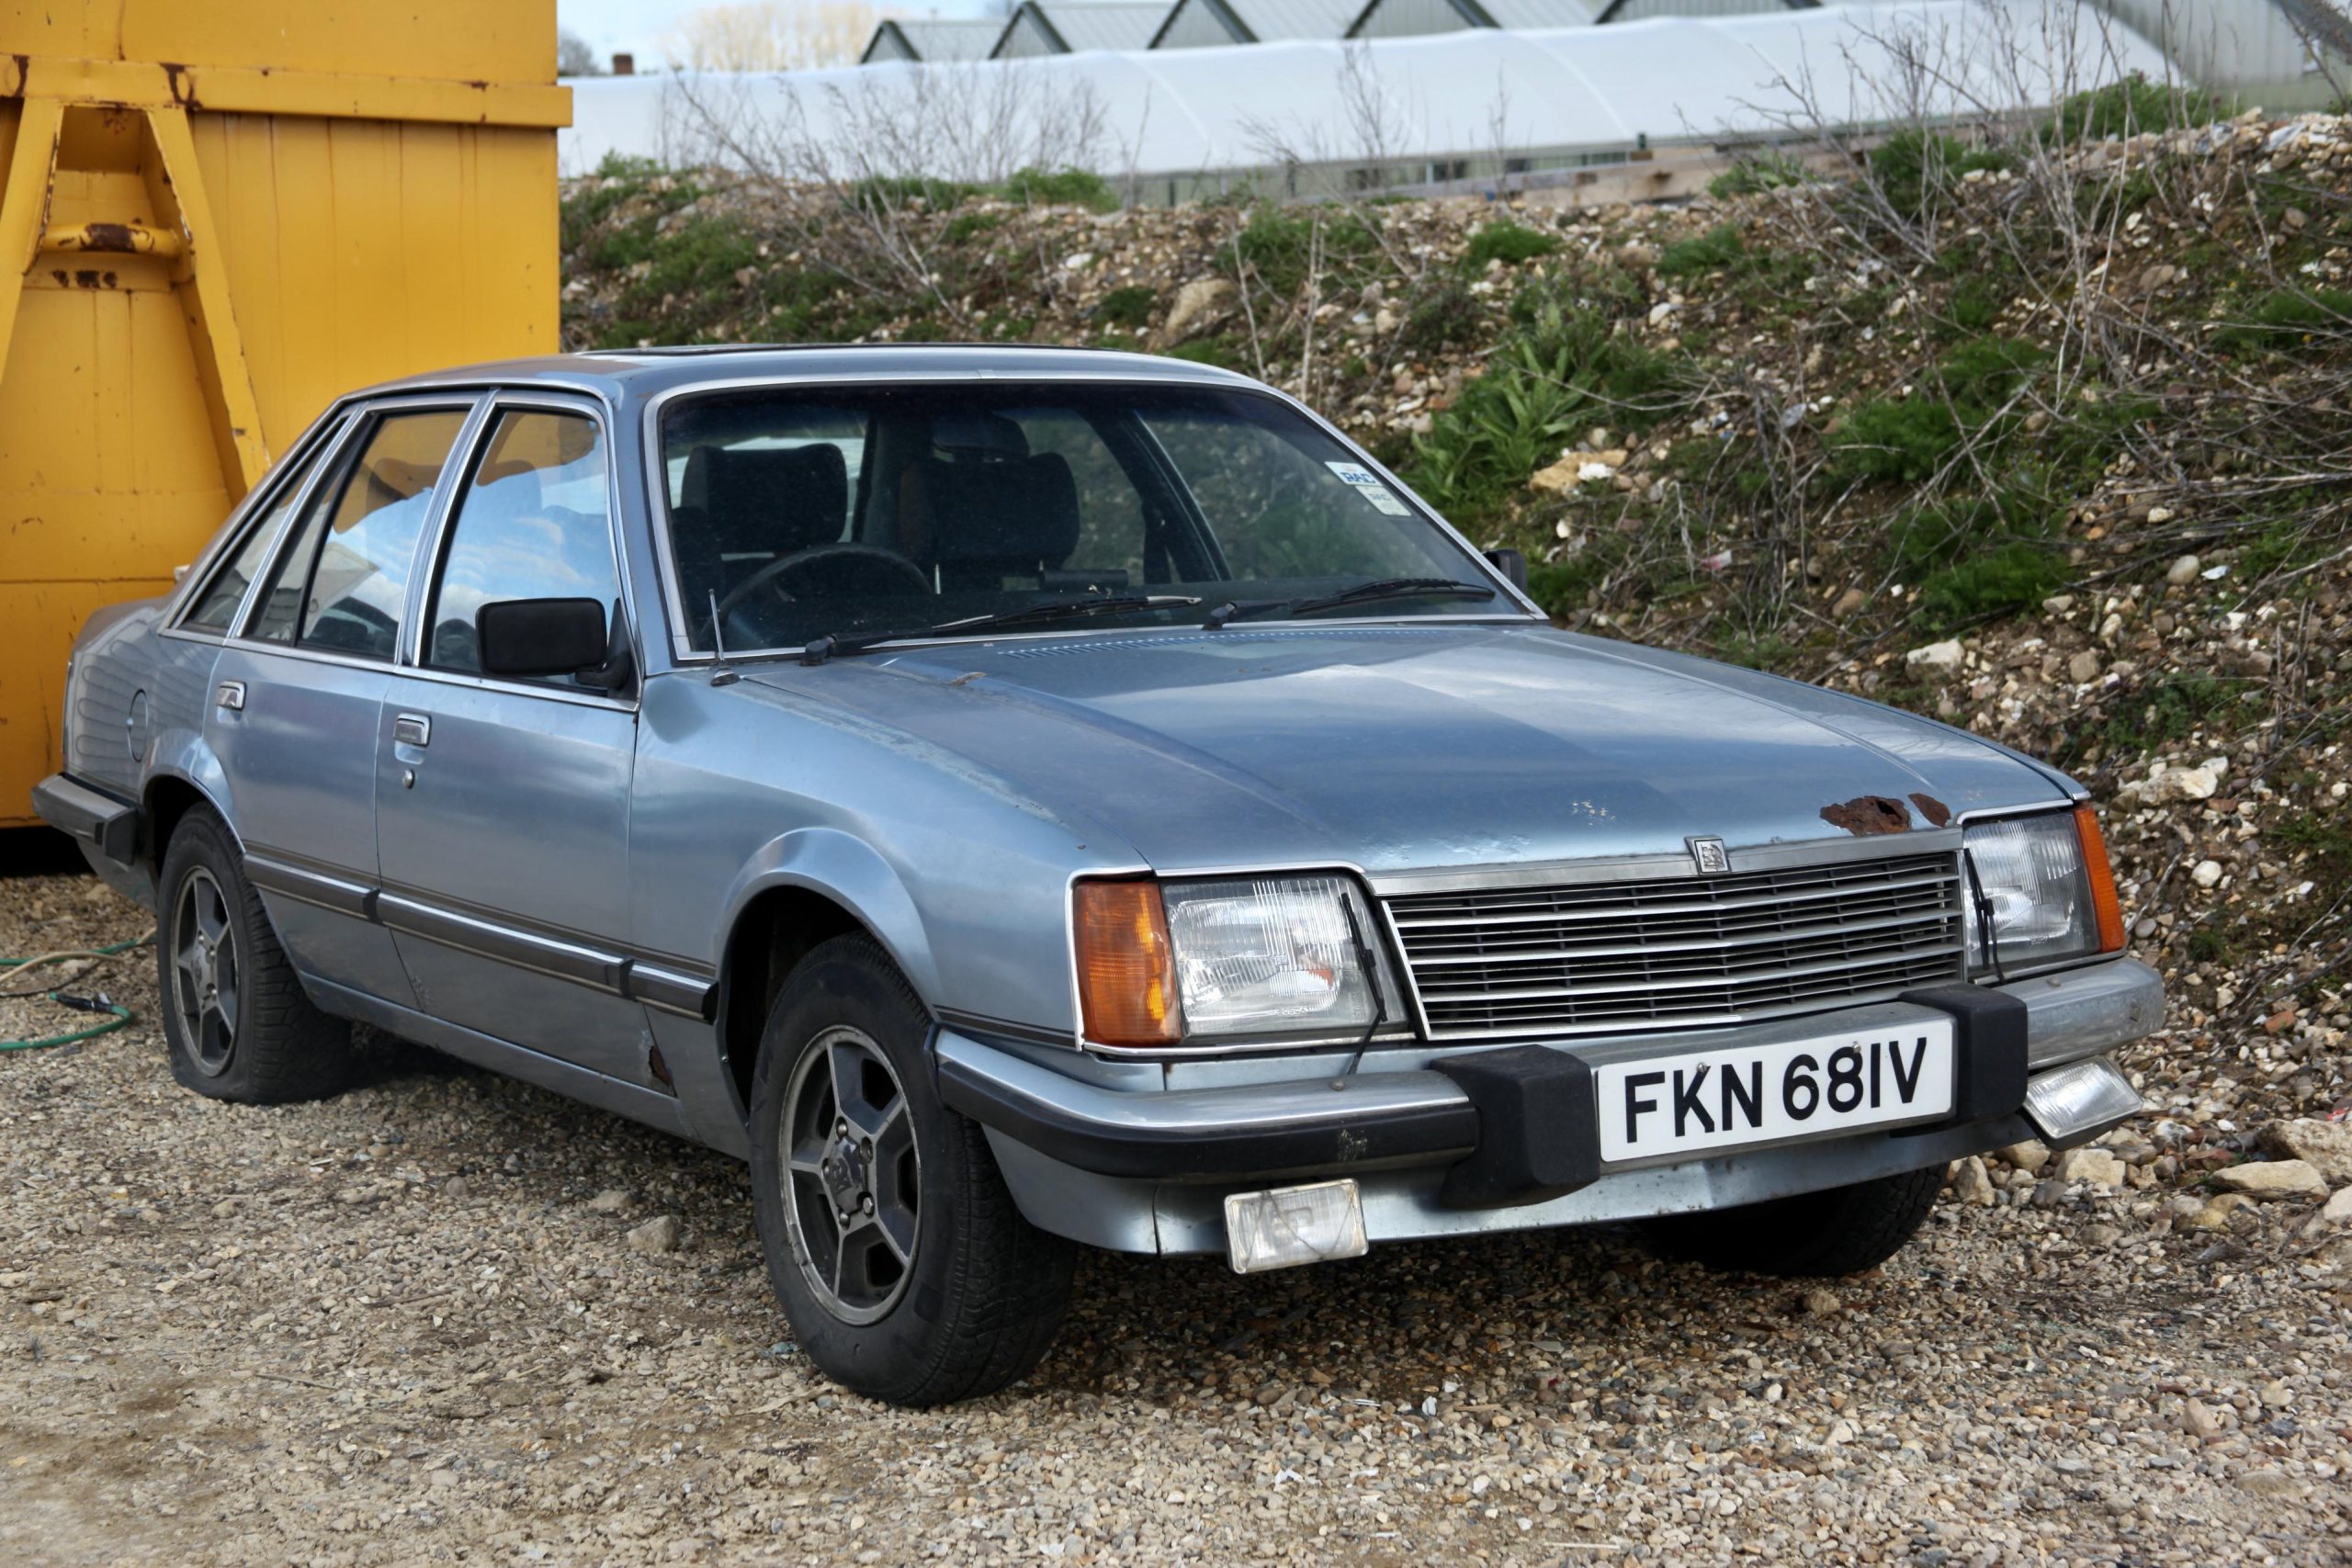 Lost Royale: The four-door saloon was Vauxhall's crowning glory